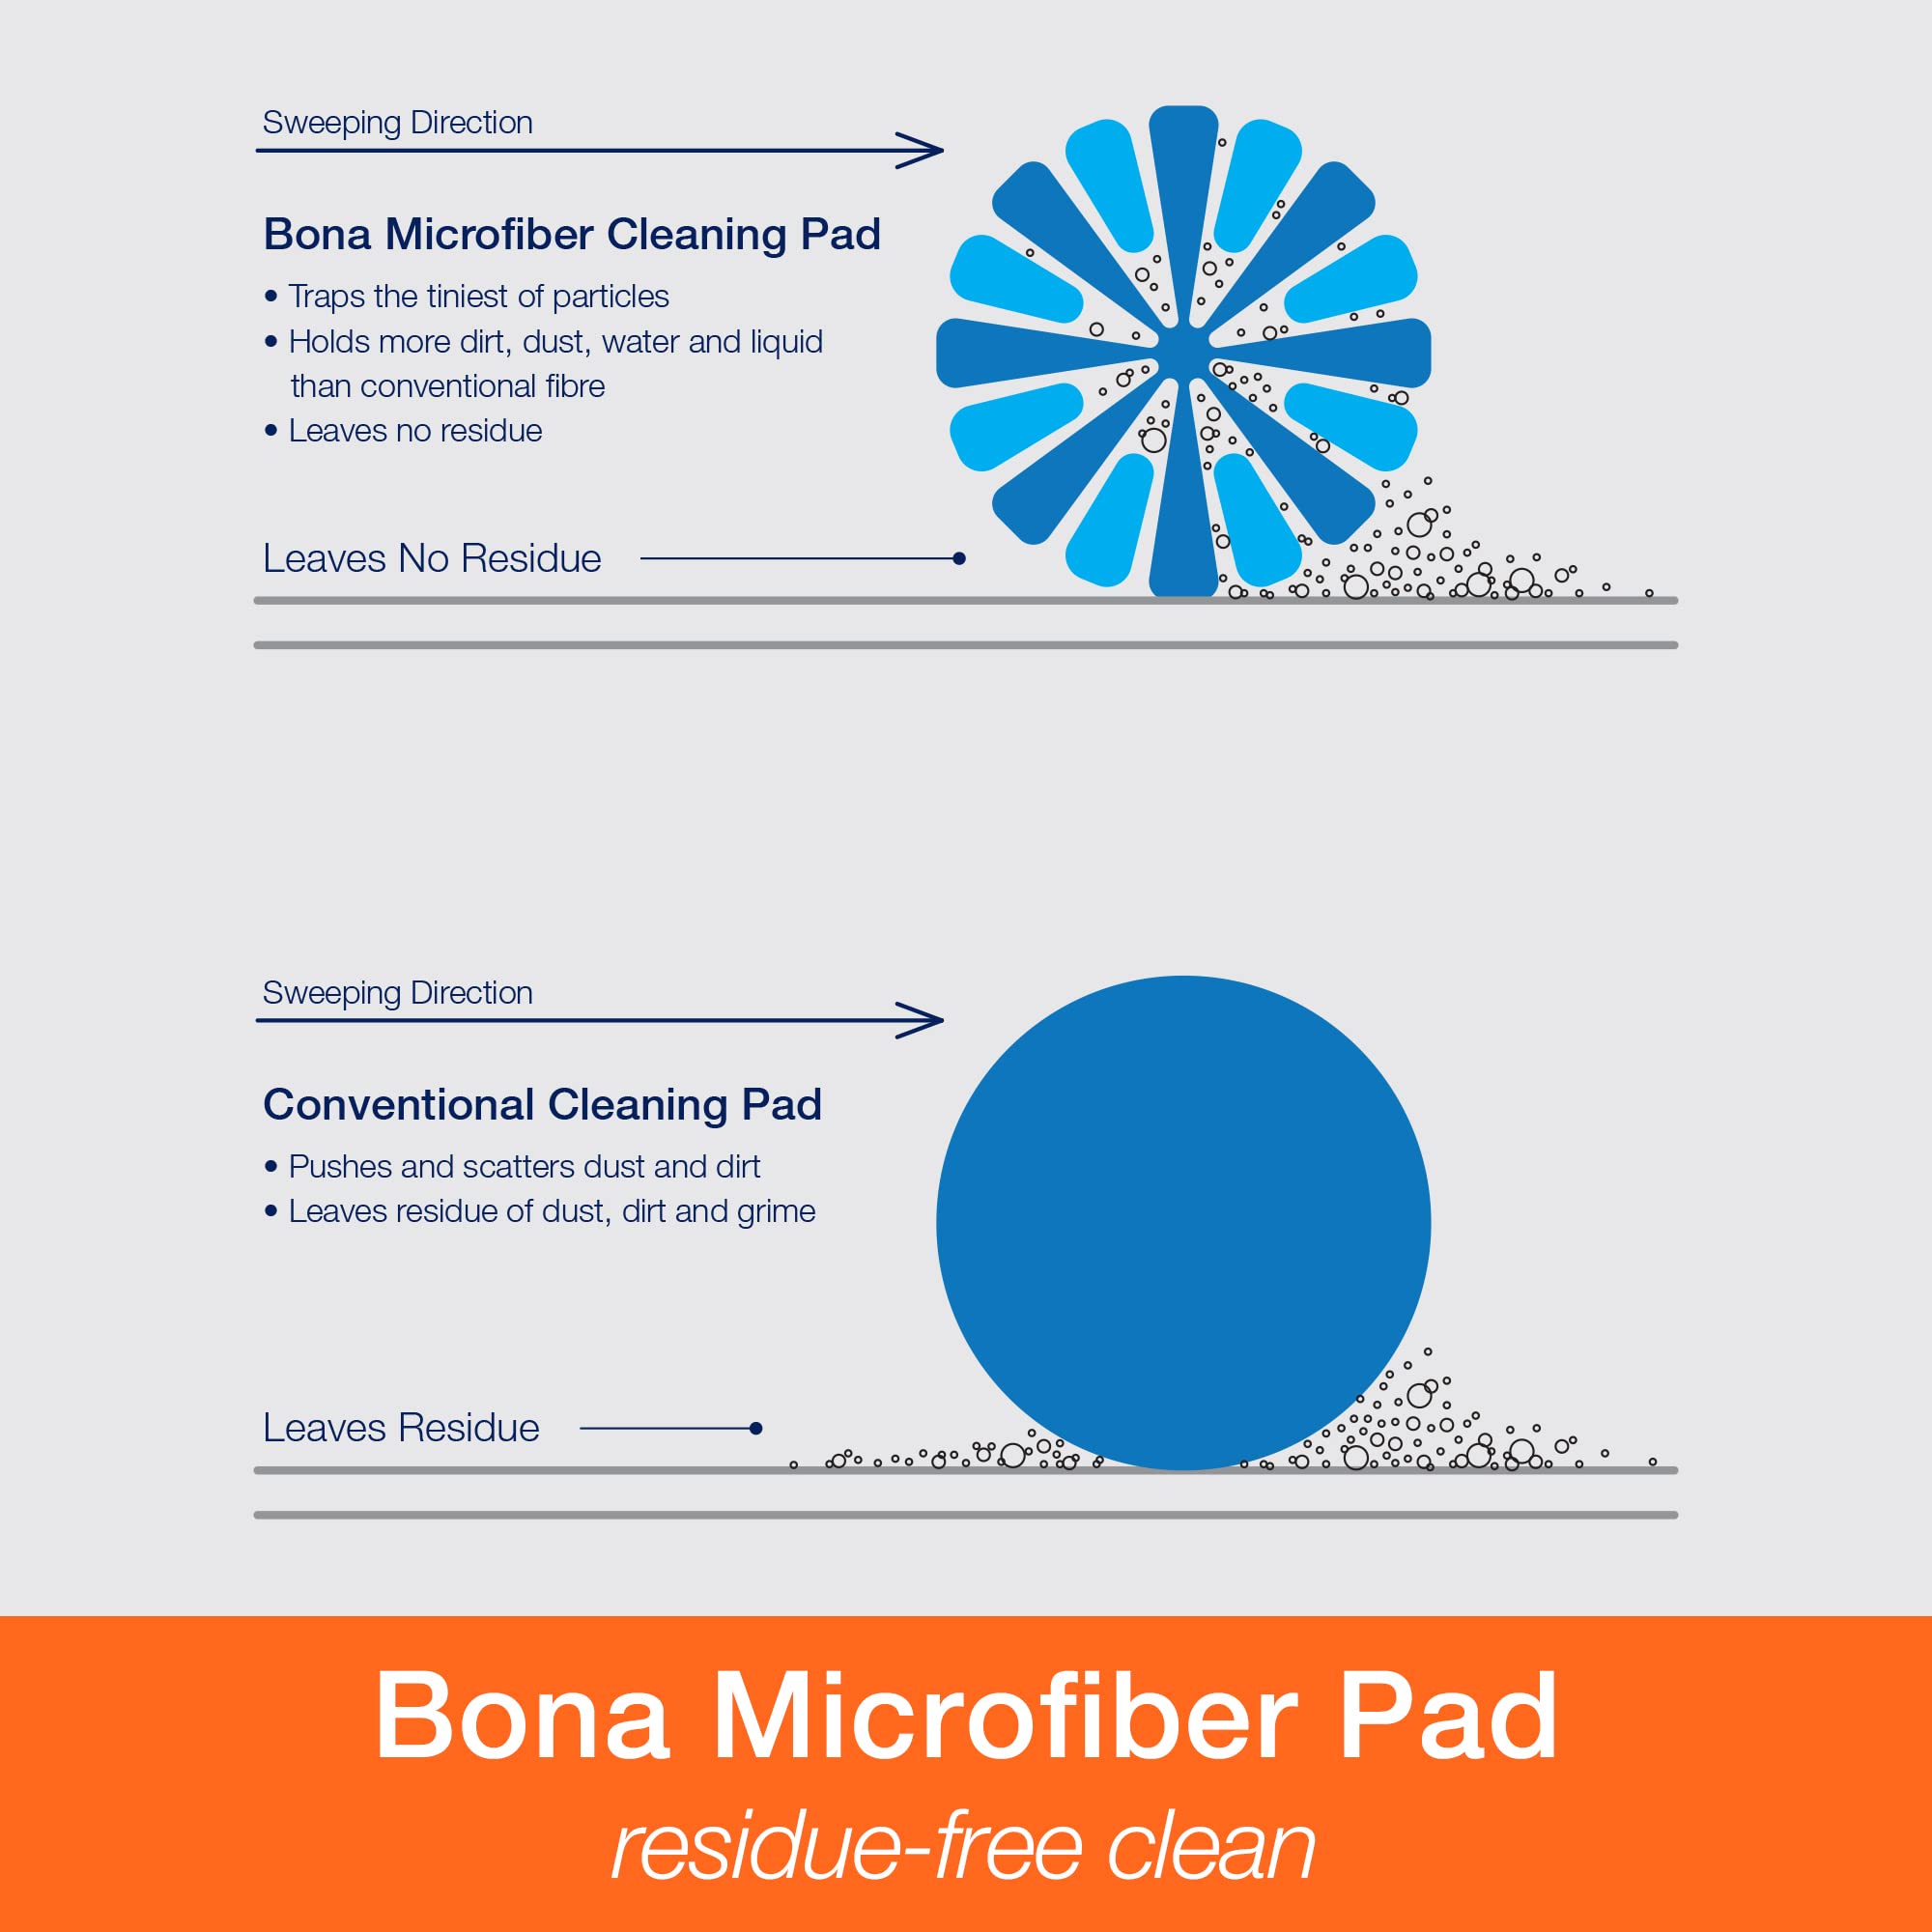 Bona Hardwood Floor Premium Spray Mop - Includes Wood Floor Cleaning Solution and Machine Washable Microfiber Cleaning Pad - Dual Zone Cleaning Design for Faster Cleanup